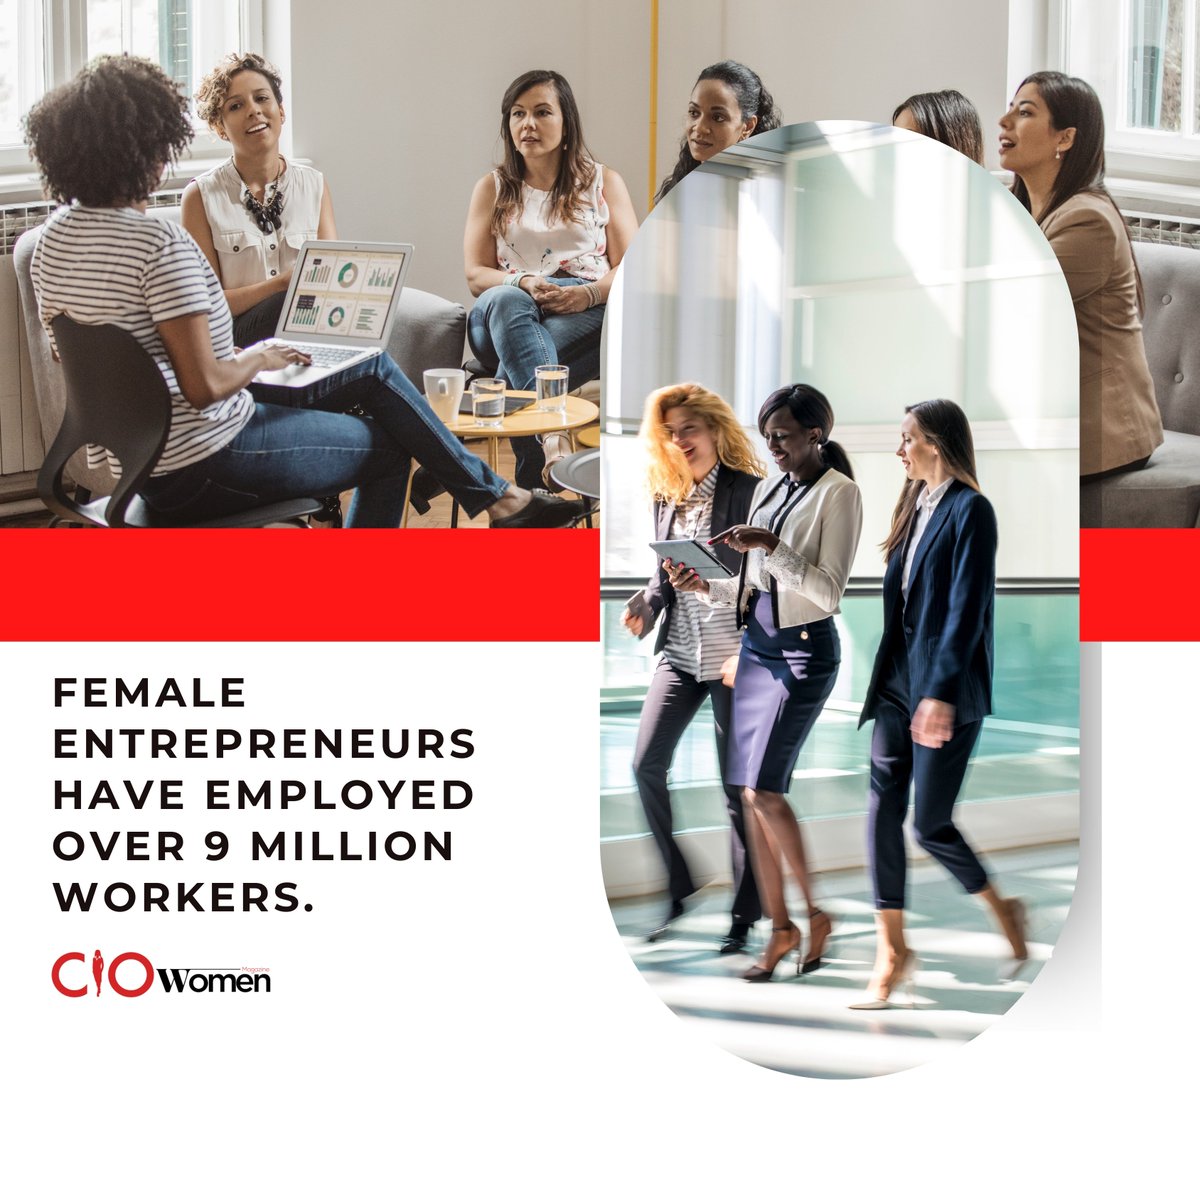 Female entrepreneurs have contributed significantly to the labor market. Over 9 million people have been employed by female entrepreneurs, making up about 8% of private sector employment.

#womenentrepreneur #womeninbusiness #entrepreneur #womenempowerment